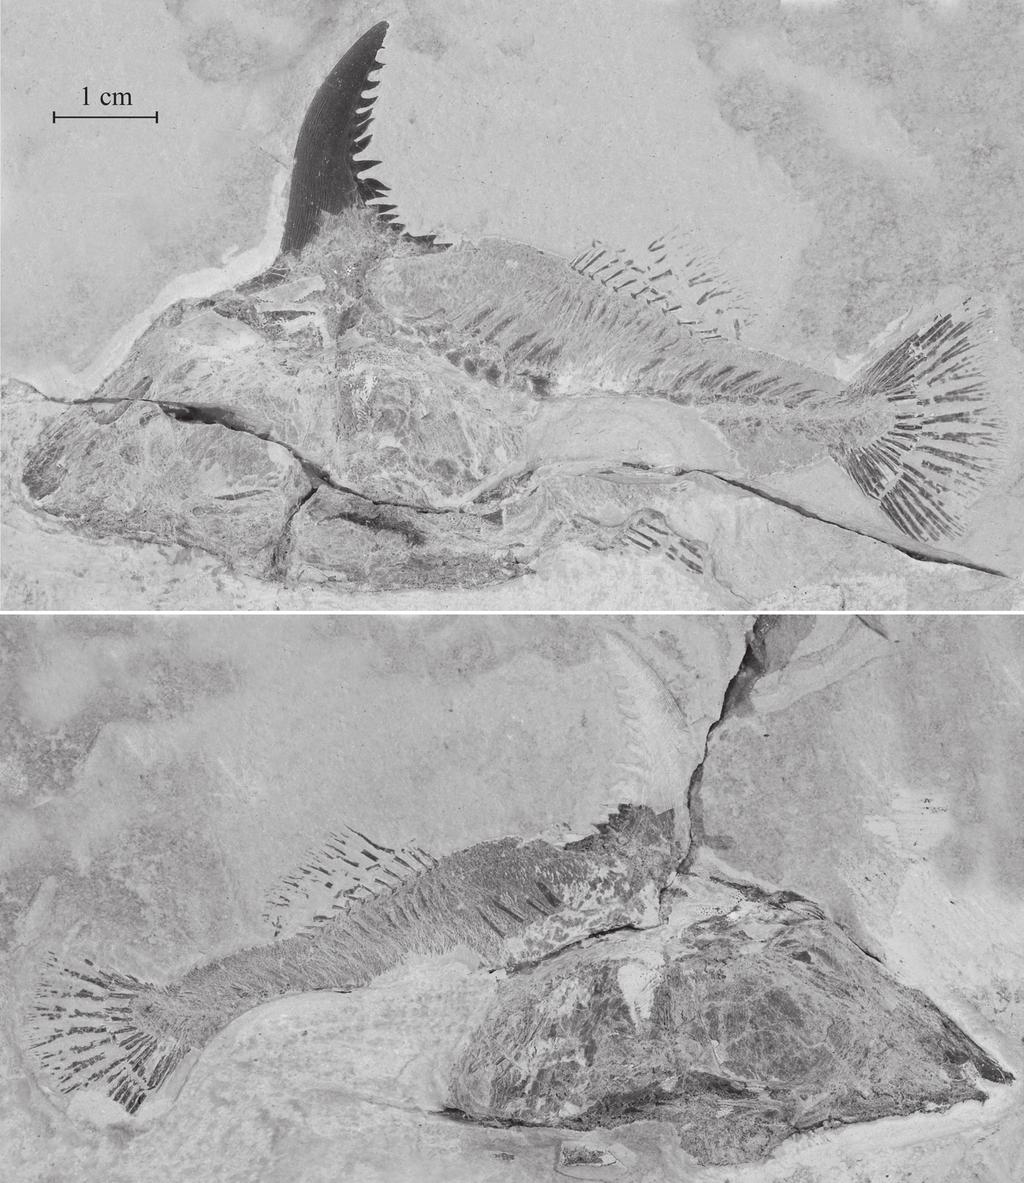 European Journal of Taxonomy 57: 1-30 (2013) Holotype morphometric data The morphometric data are given in % of the holotype standard length (87 mm). Length of the head (opercle included) 37.